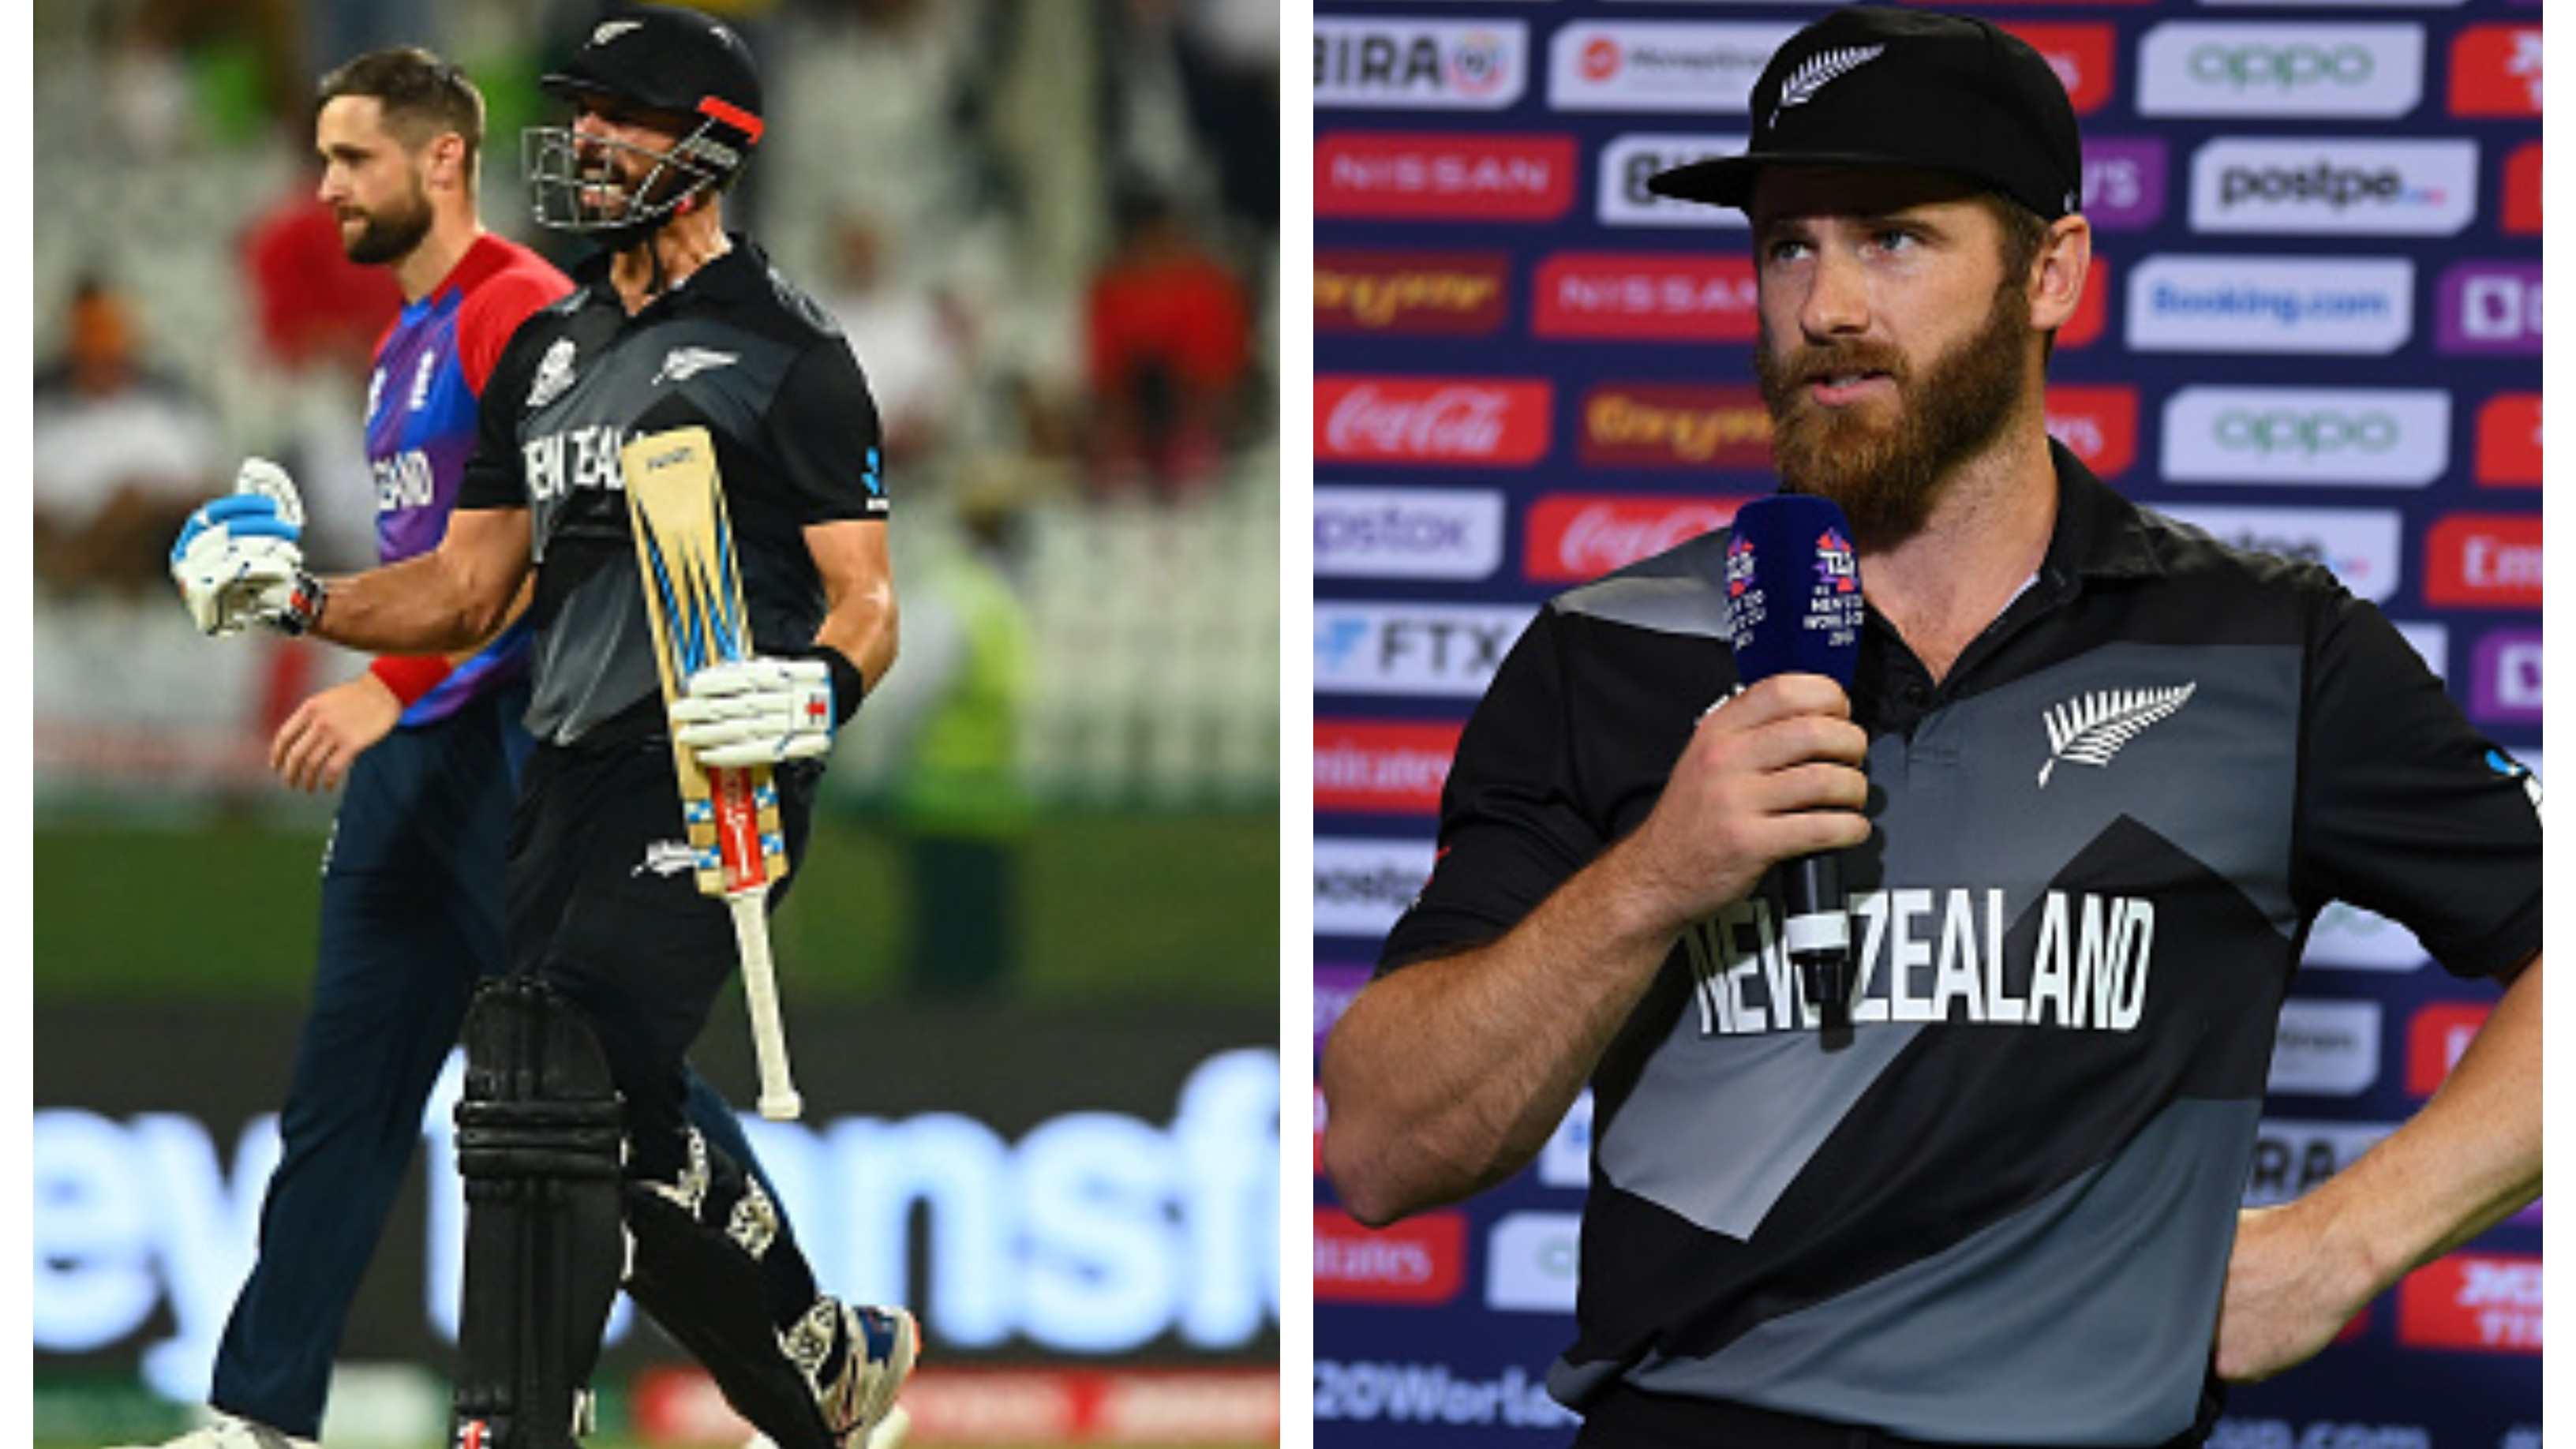 T20 World Cup 2021: ‘Daryl Mitchell's character stood out in semi-final win over England’, says Kane Williamson